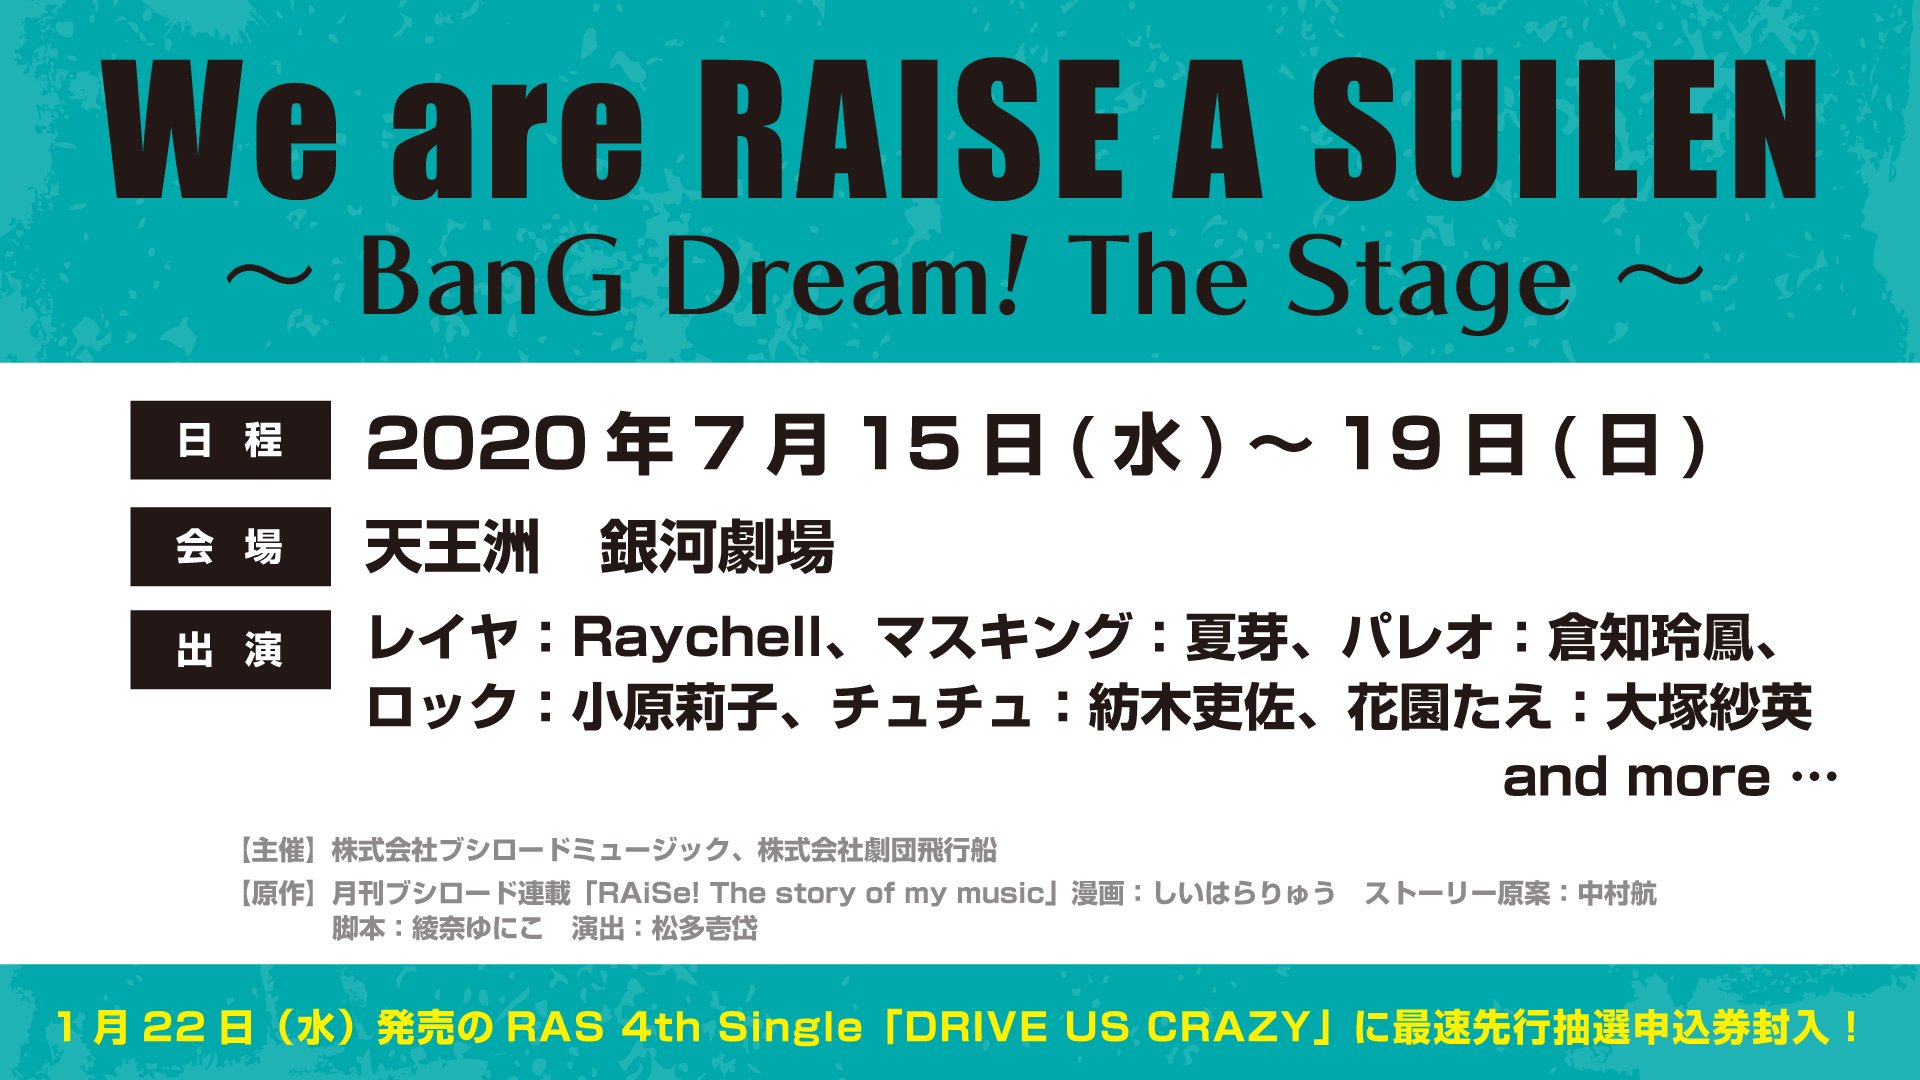 BanG Dream! Updates on Twitter: 'We are RAISE A SUILEN ～BanG Drea! The  Stage～ has just been announced to take place from 15th-19th July 2020! This  will be a *stage play* by